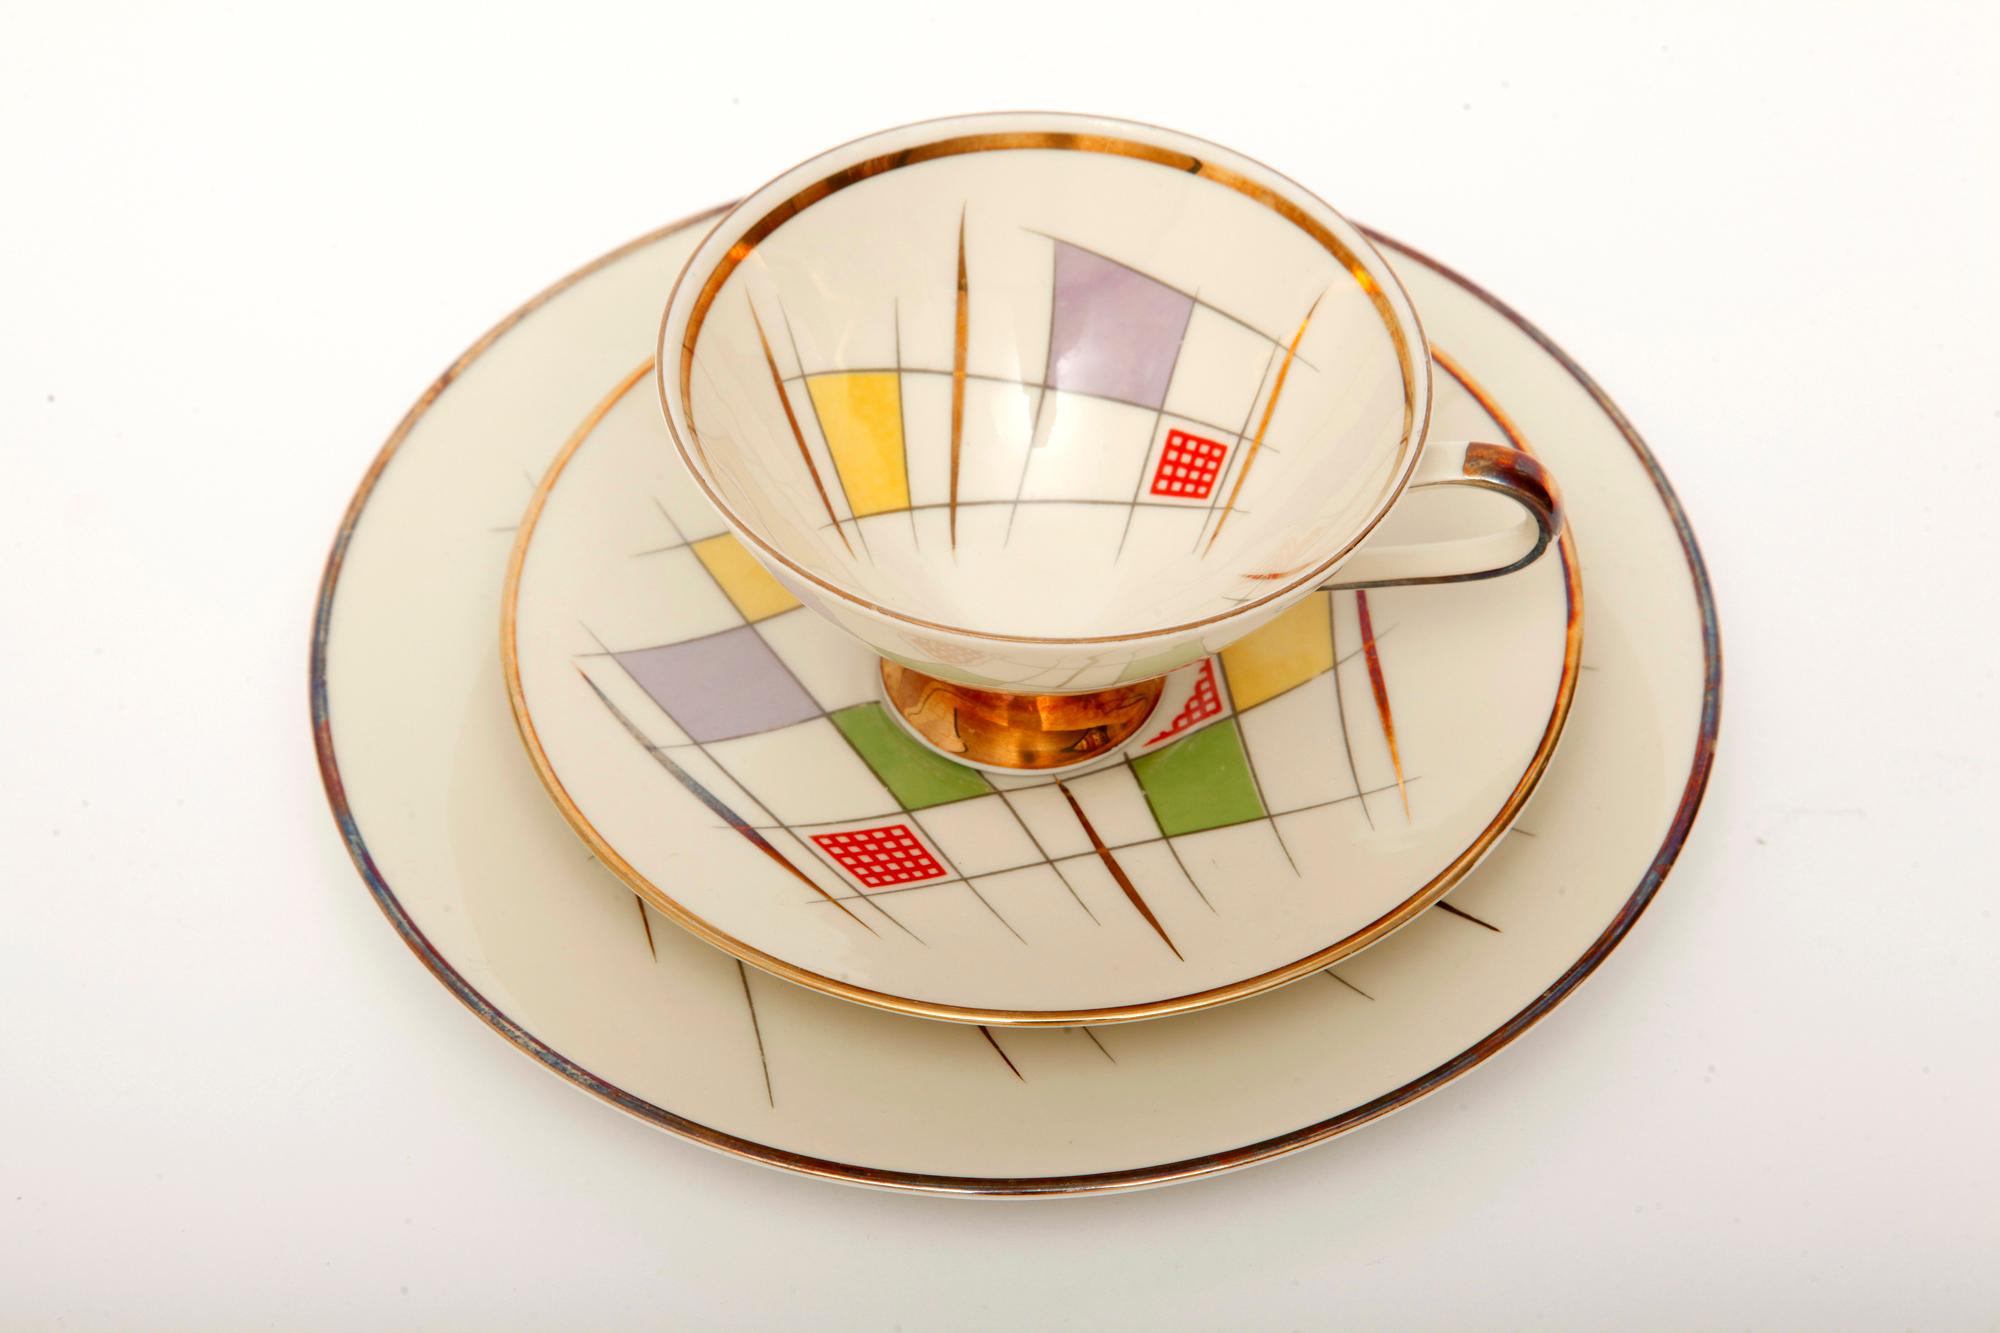 Hand-Painted Colorful Porcelain Breakfast Set, Bavaria, Germany, Mid-Century Modern, 1950s